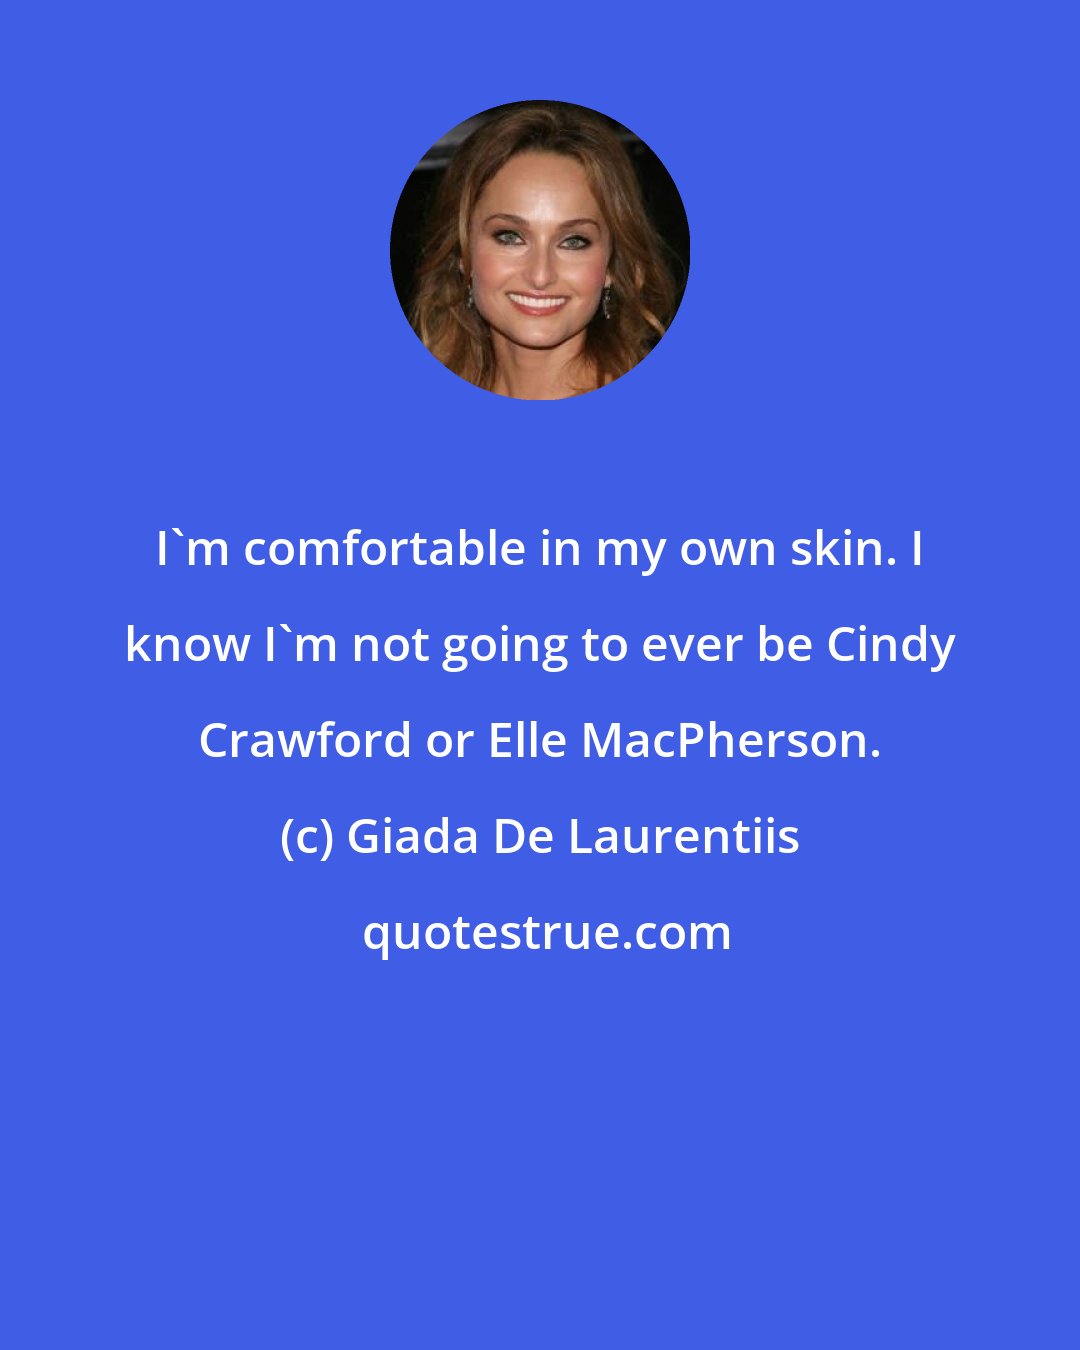 Giada De Laurentiis: I'm comfortable in my own skin. I know I'm not going to ever be Cindy Crawford or Elle MacPherson.